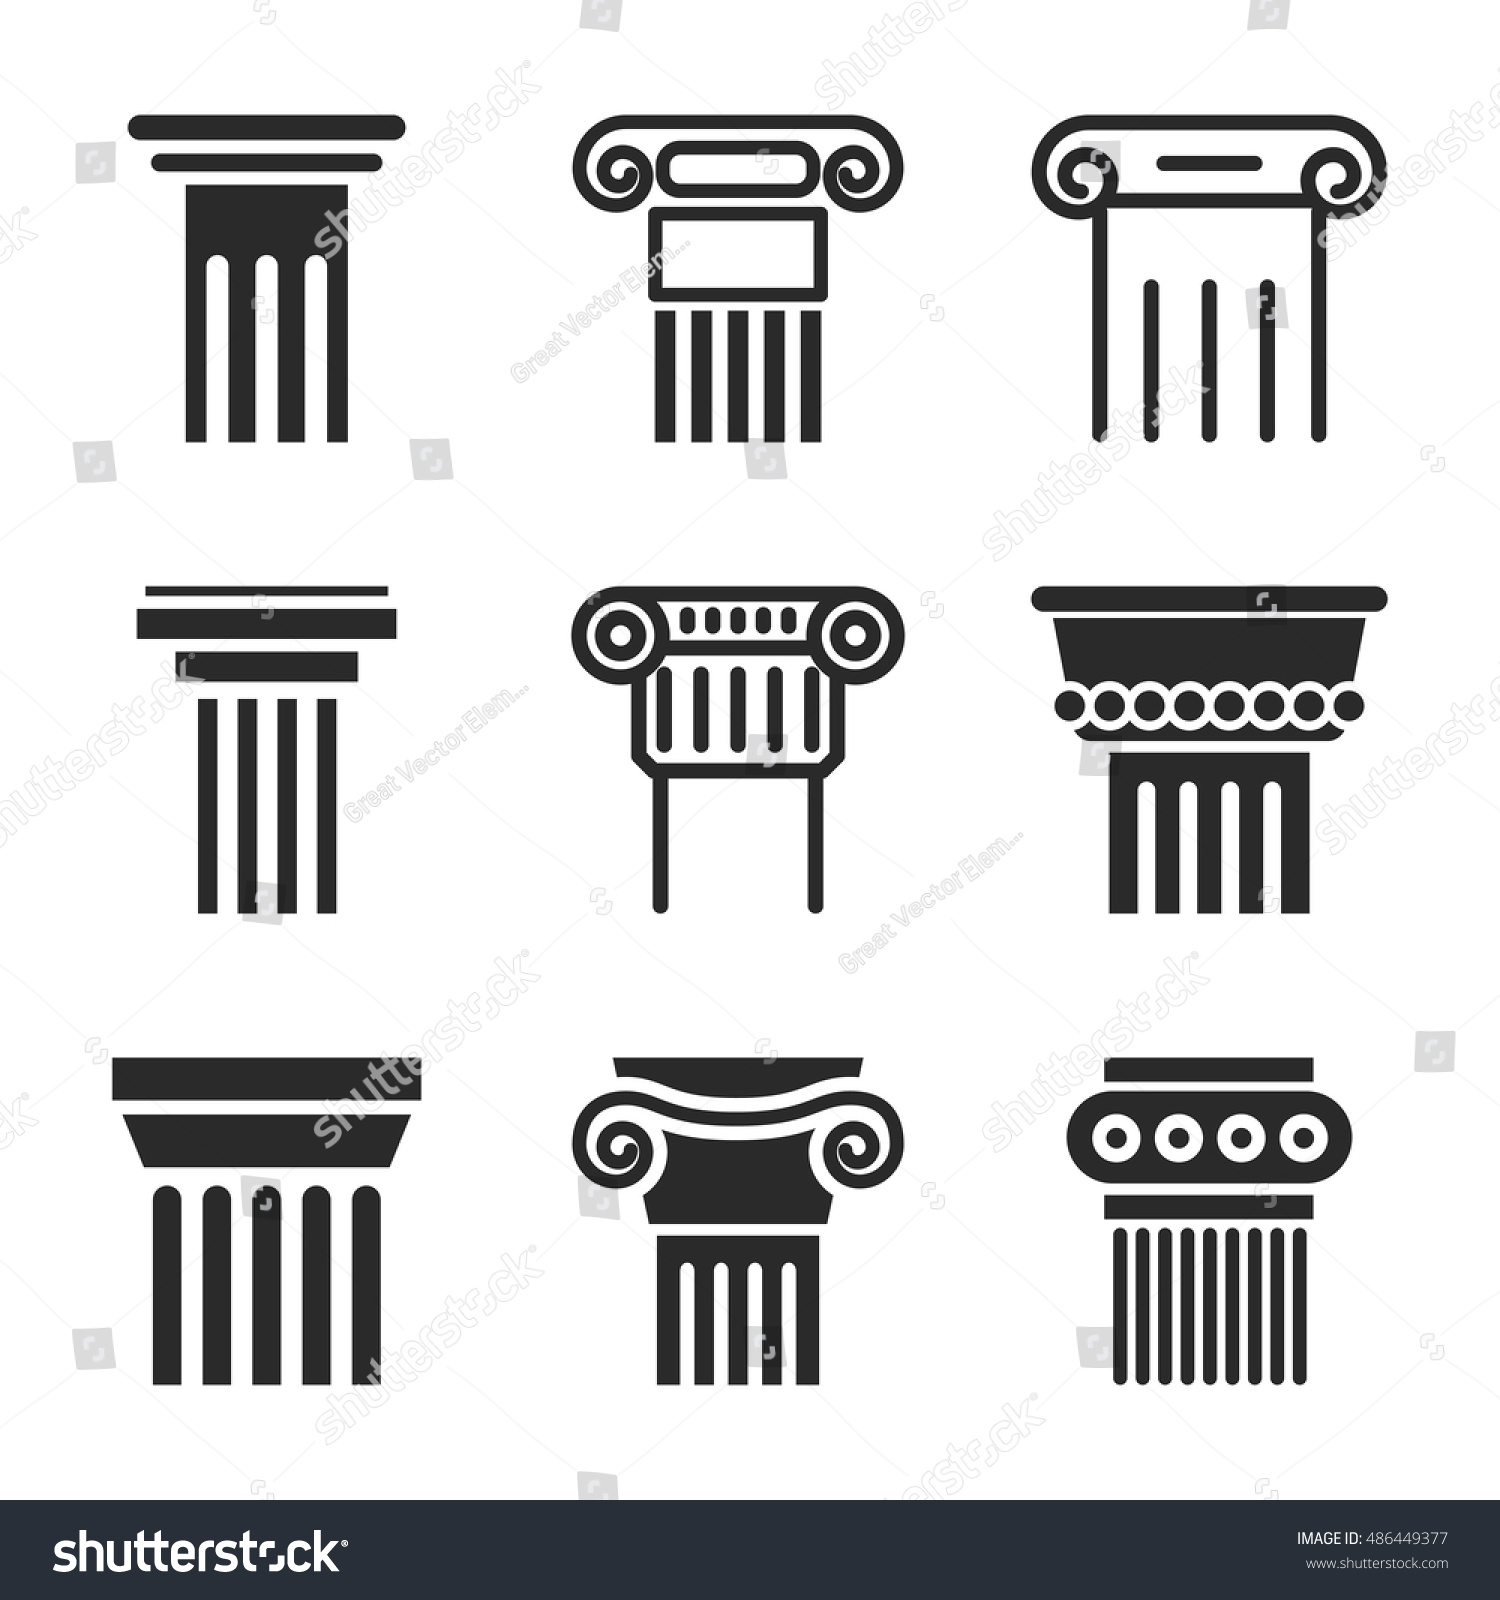 Column Vector Icons Simple Illustration Set Stock Vector (Royalty Free ...